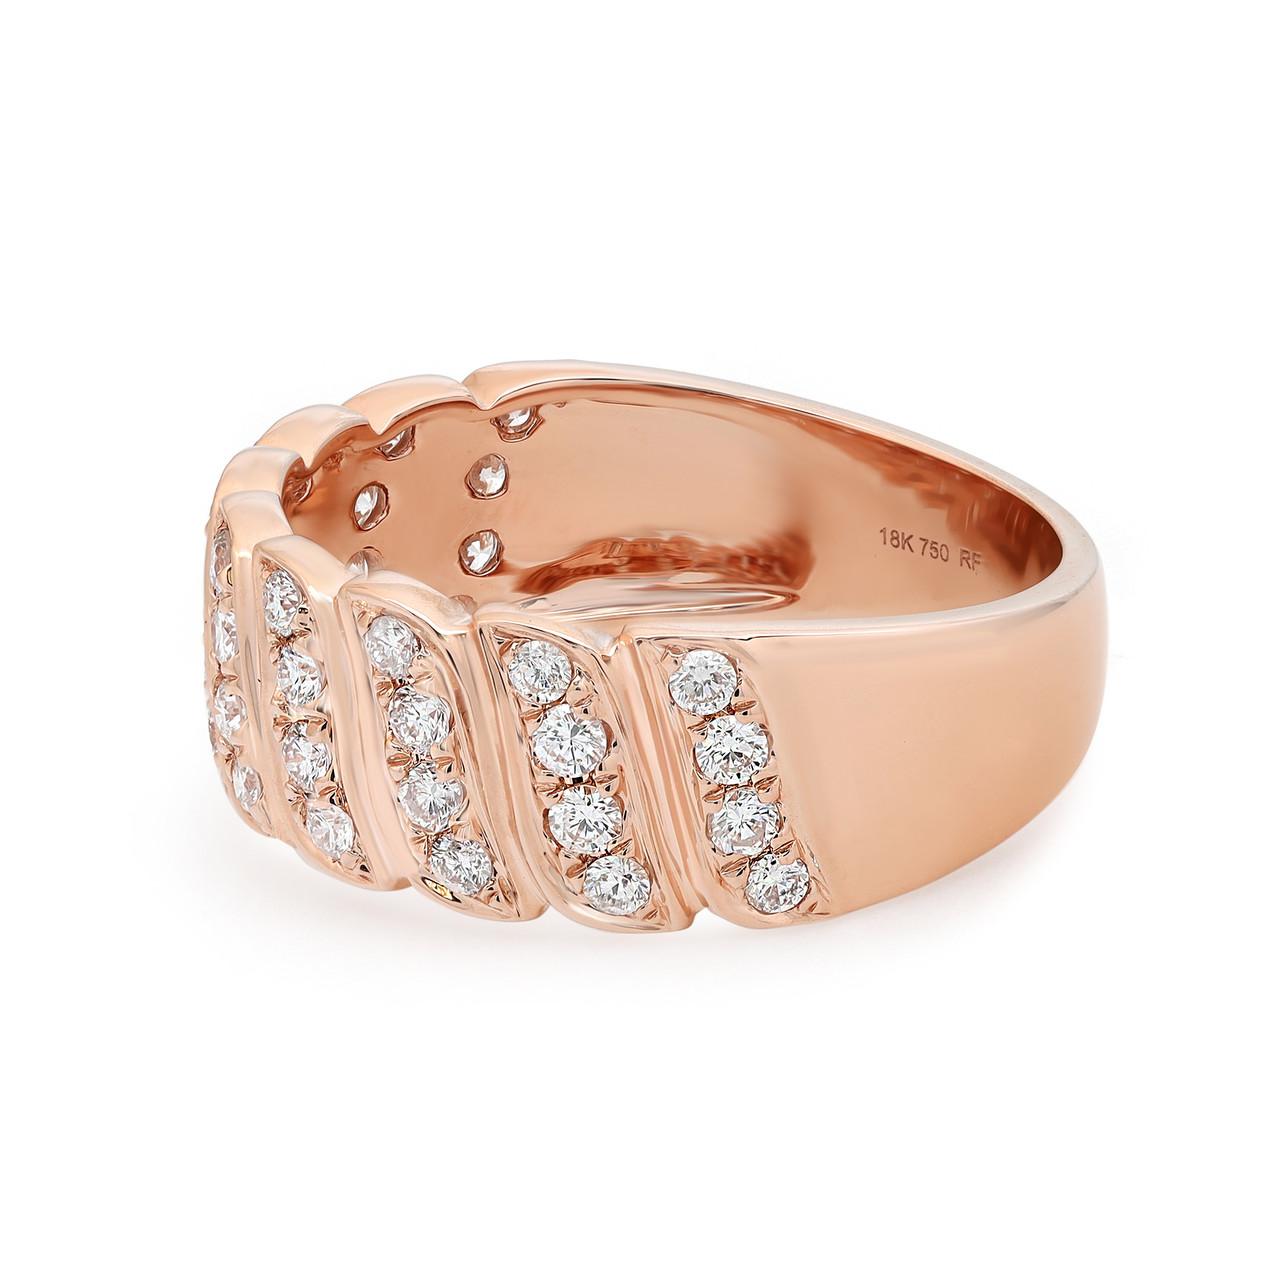 Introducing our exquisite 0.52 Carat Round Cut Diamond Band Ring in 18K Rose Gold. This stunning piece is guaranteed to capture attention with its dazzling display of diamonds. The timeless and fashionable design of this diamond band ring makes it a